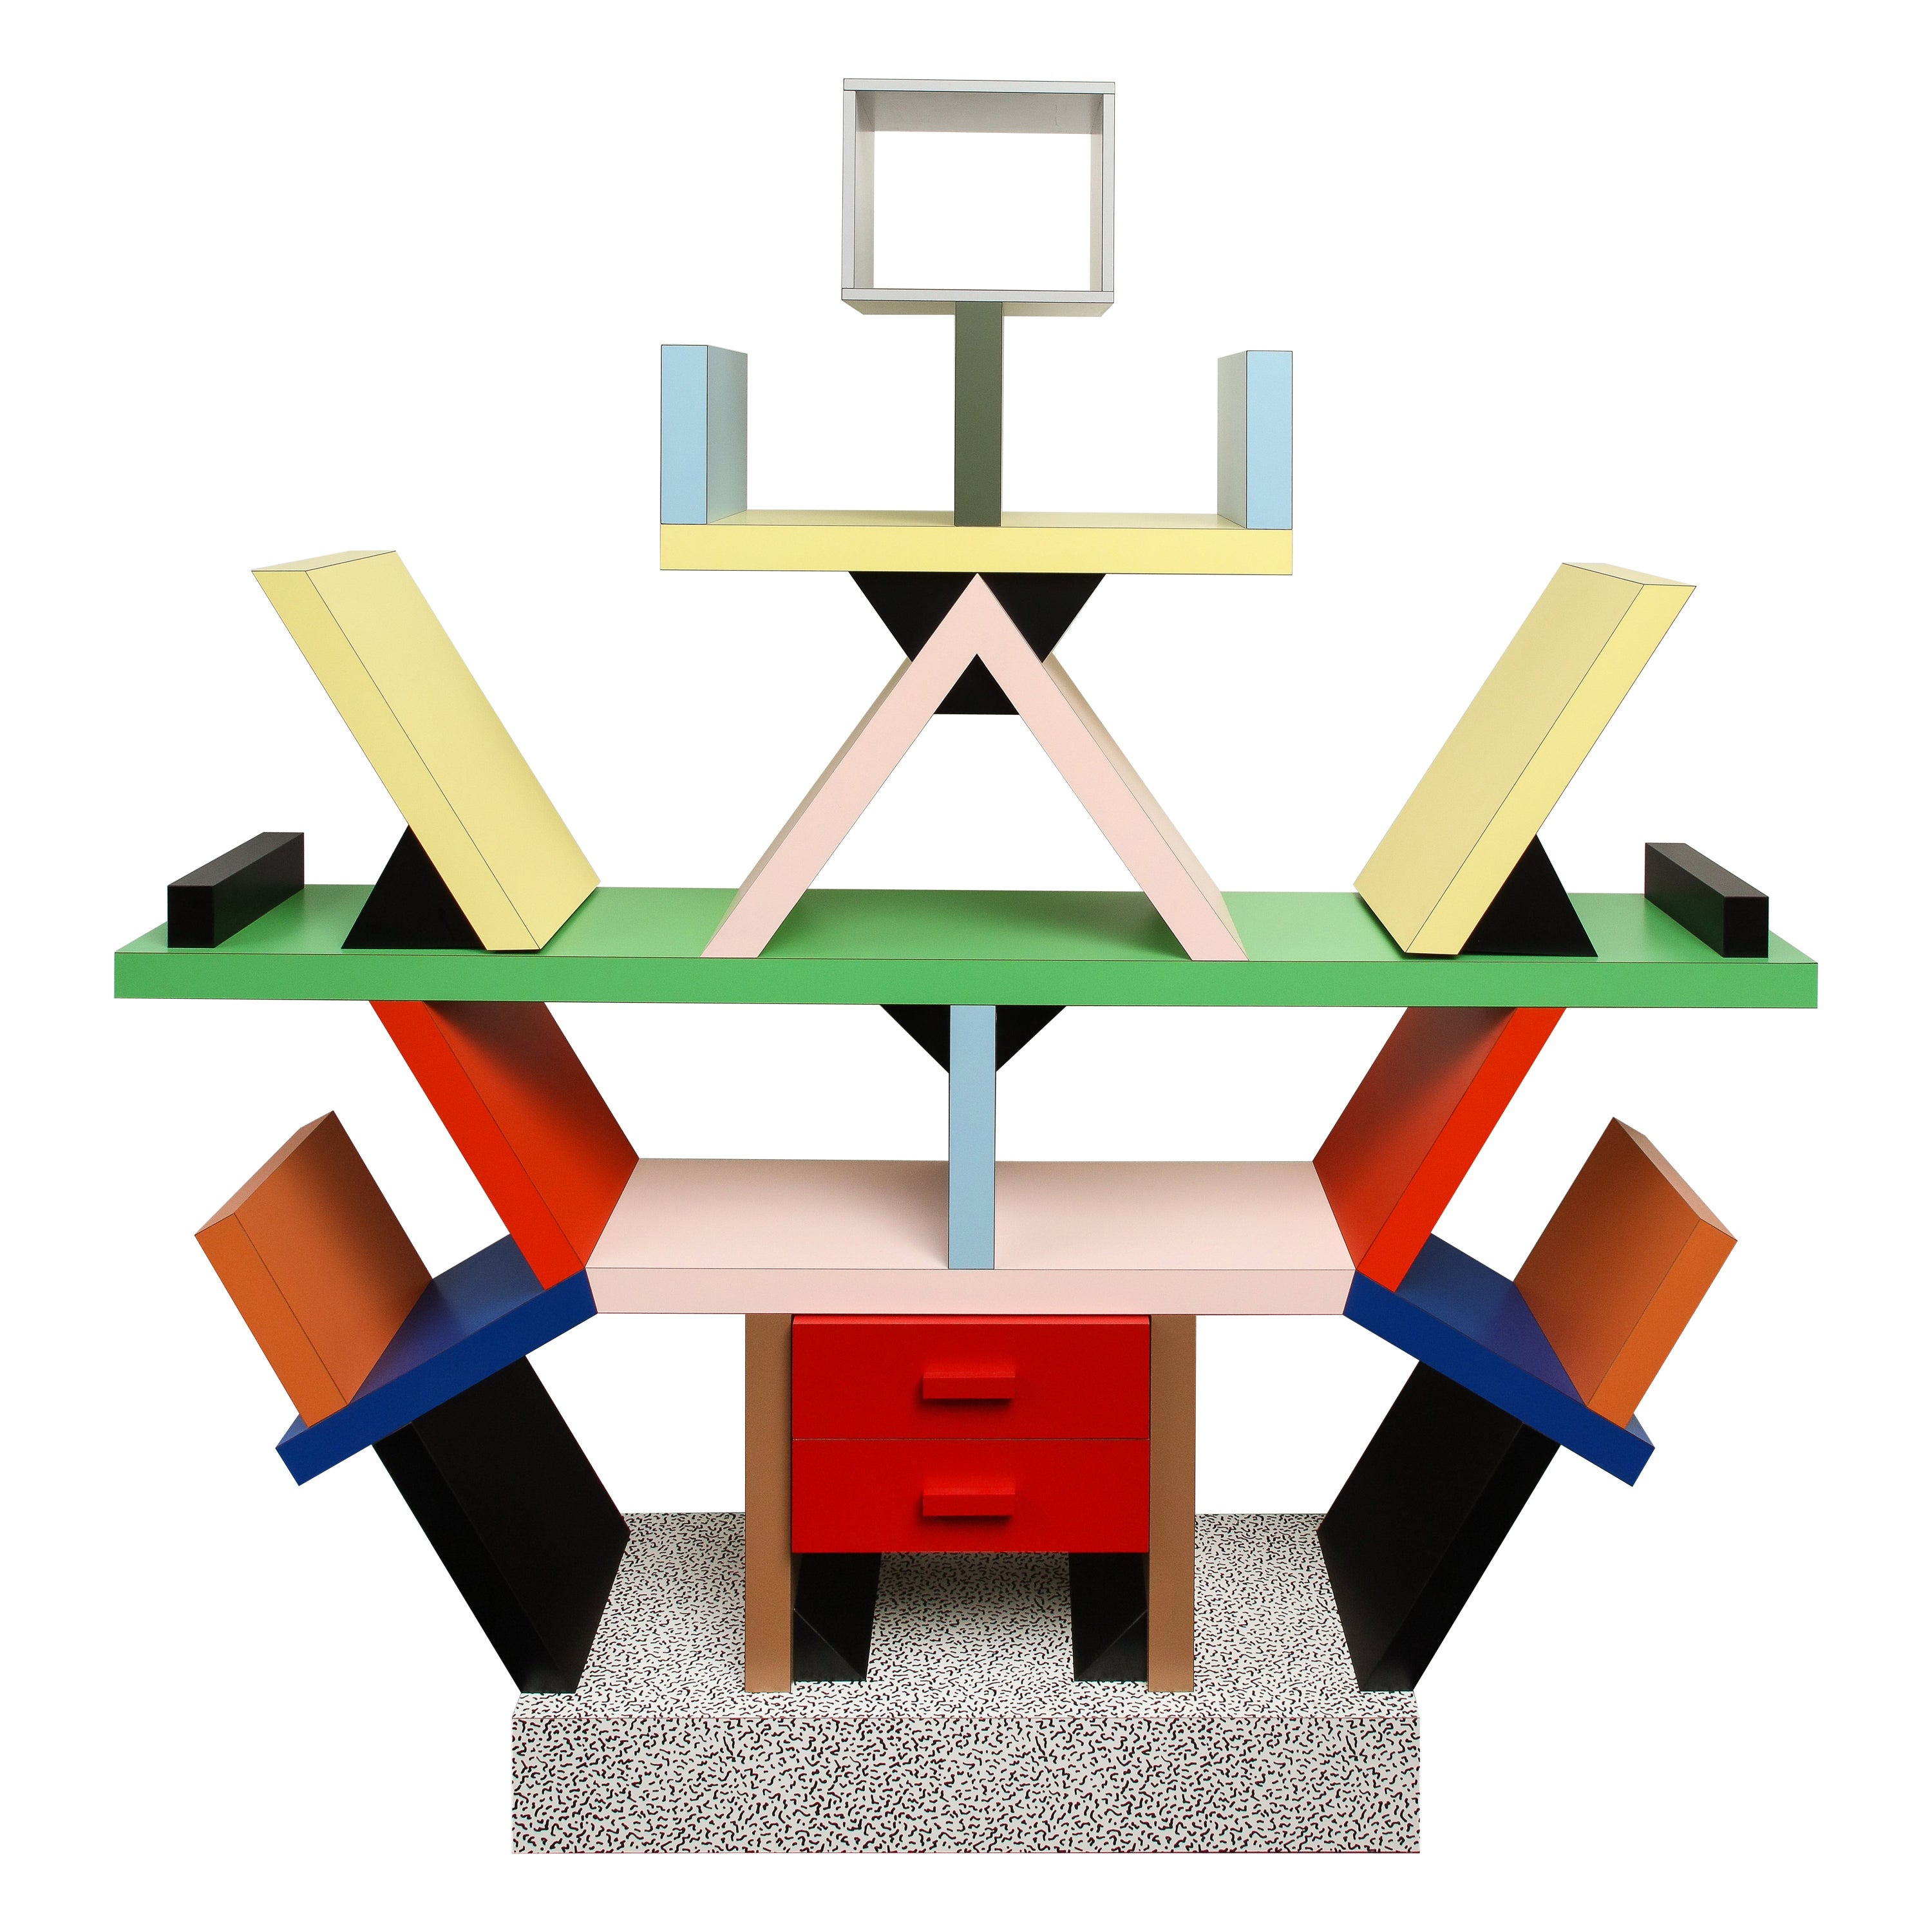 Carlton Memphis Milano Bookcase or Room Divider by Ettore Sottsass, 1981